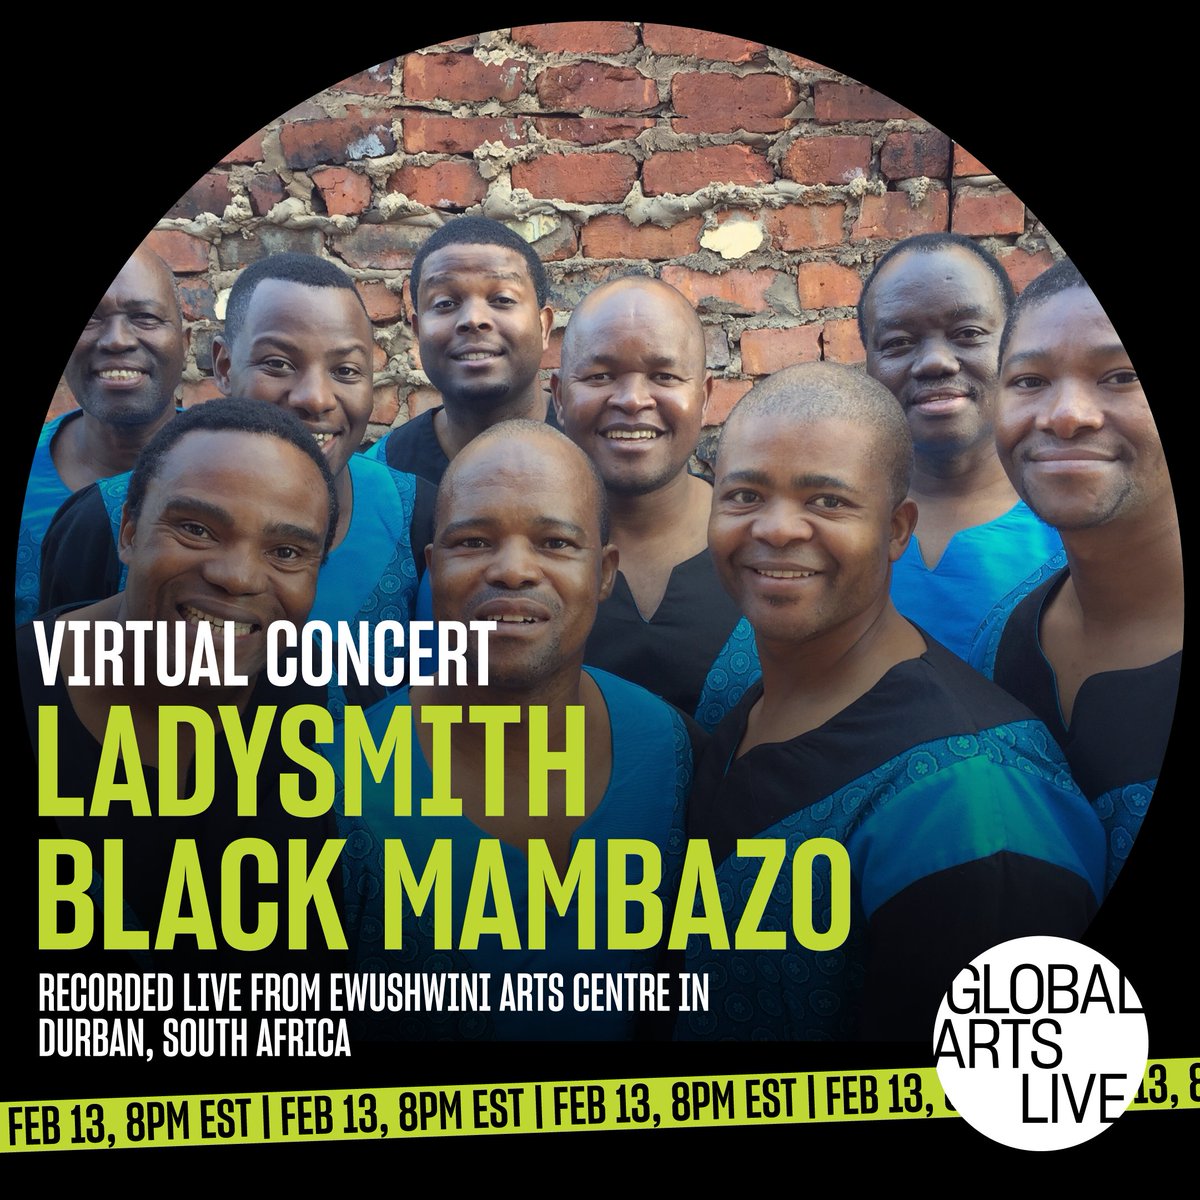 Tonight’s the big night! Did you get your tickets for this virtual concert already? If not, get them now @ bit.ly/2NdUZGp Presented by @globalartslive #LadysmithBlackMambazo #virtualconcert #ewushwiniartscentre #globalartslive